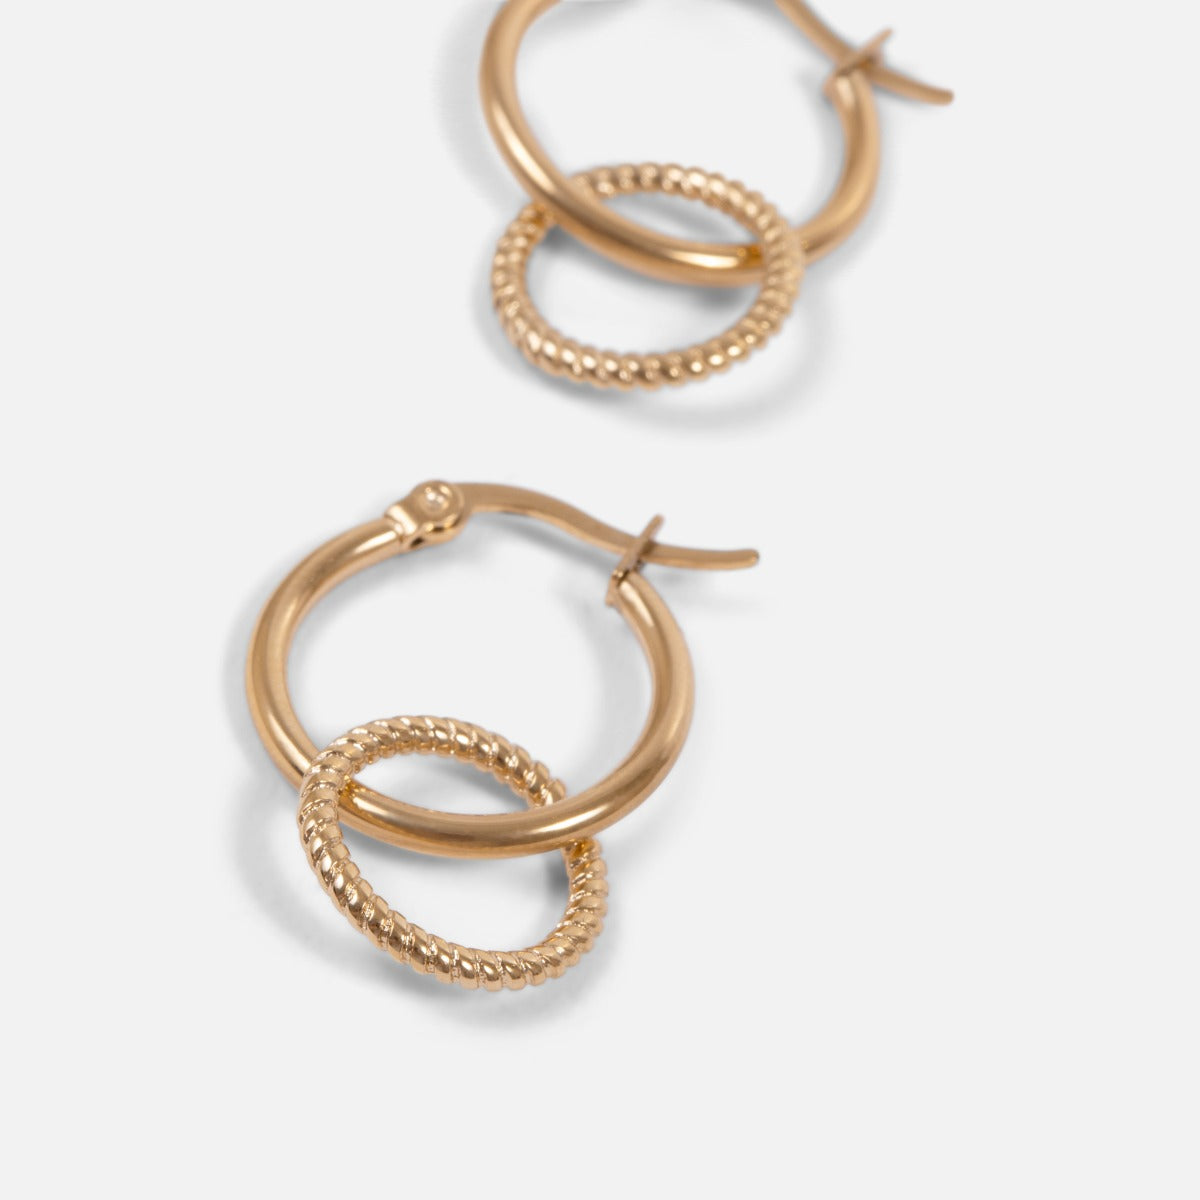 Golden stainless steel earrings with two different hoops